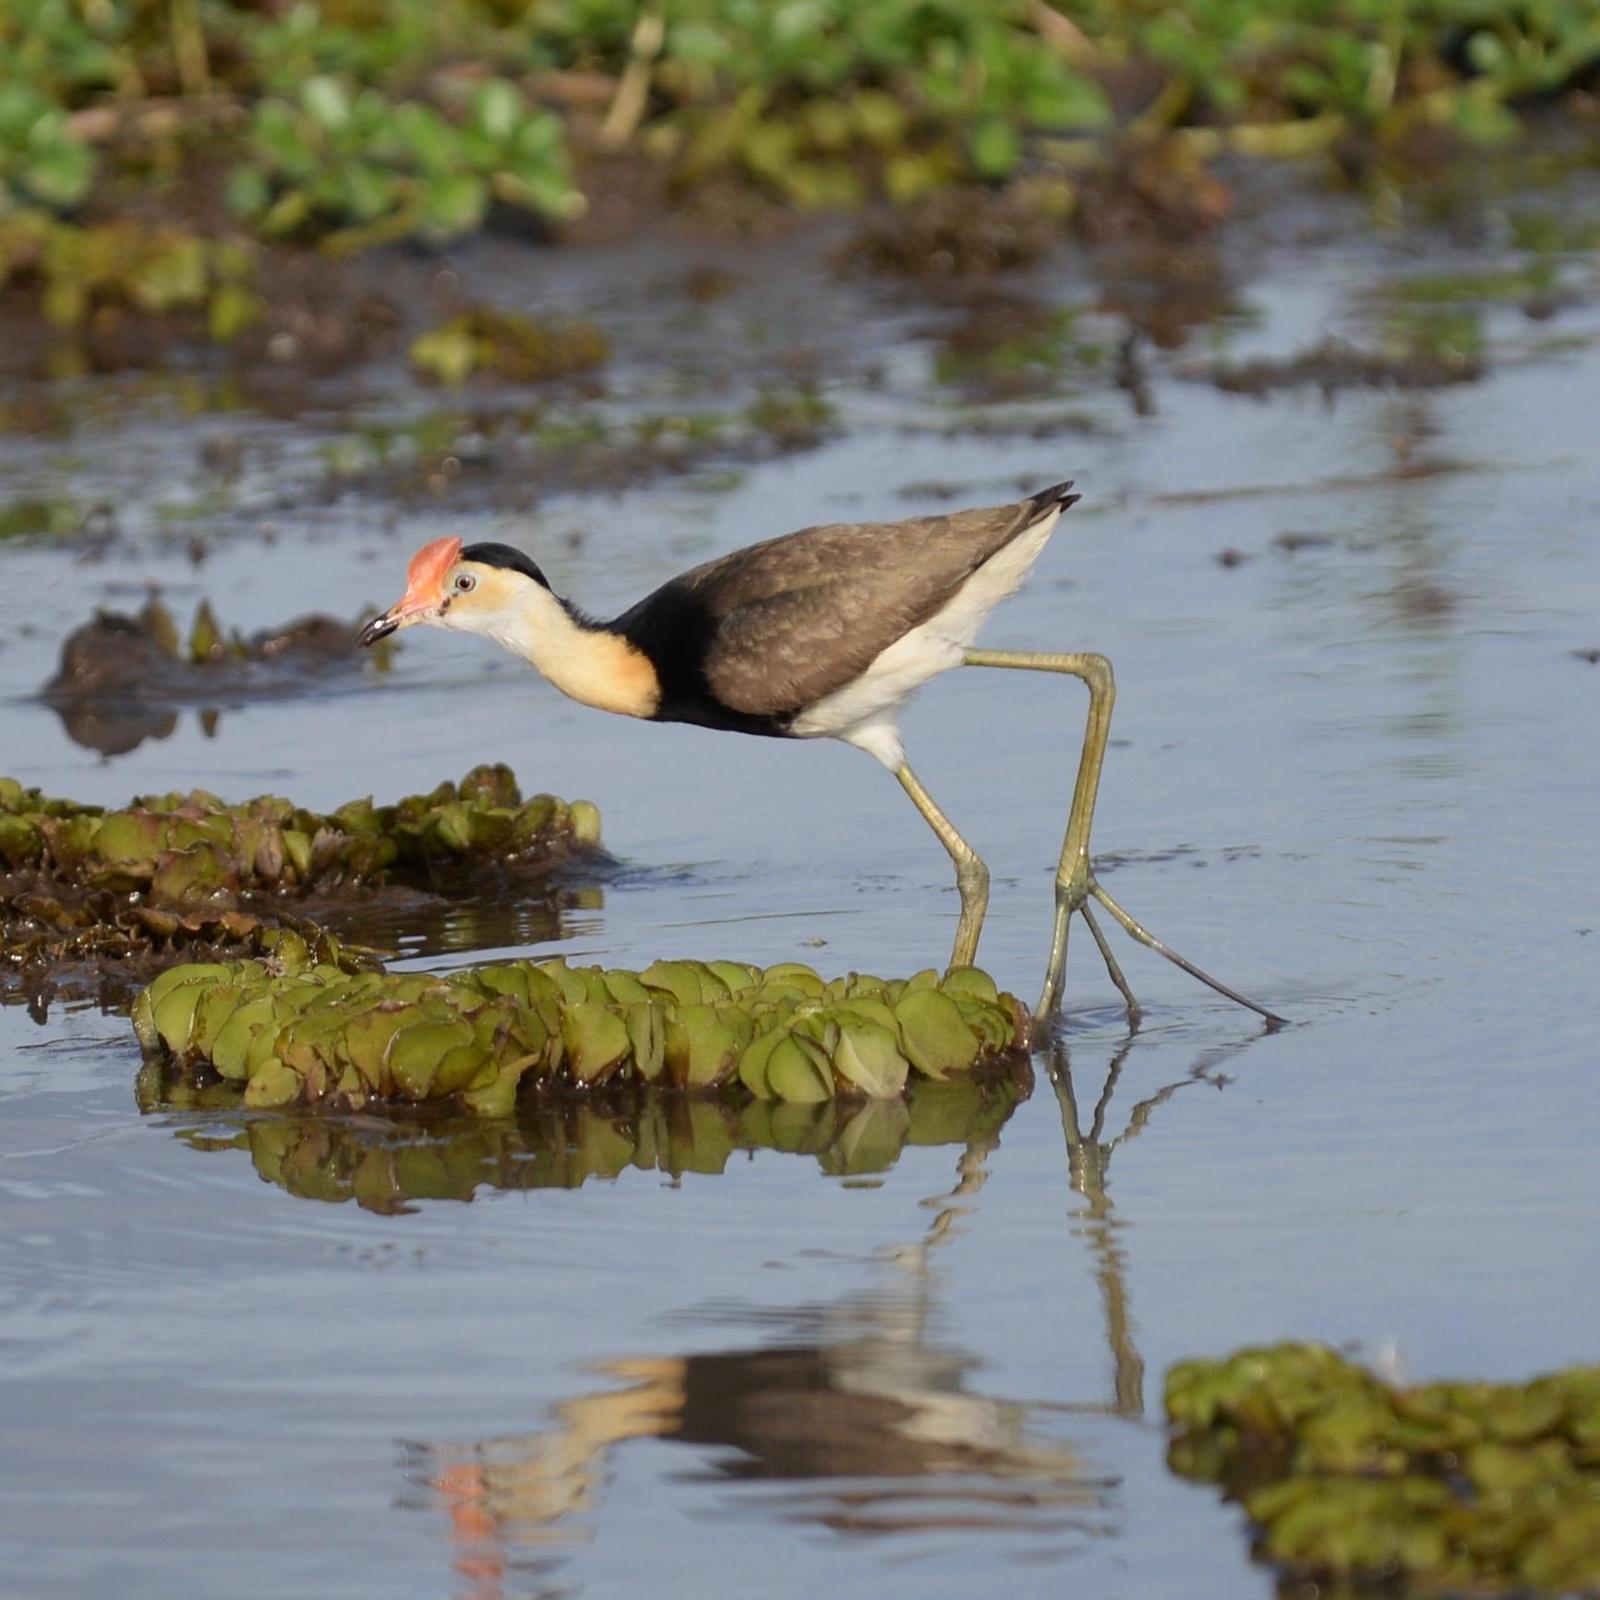 Comb-crested Jacana Photo by marcel finlay